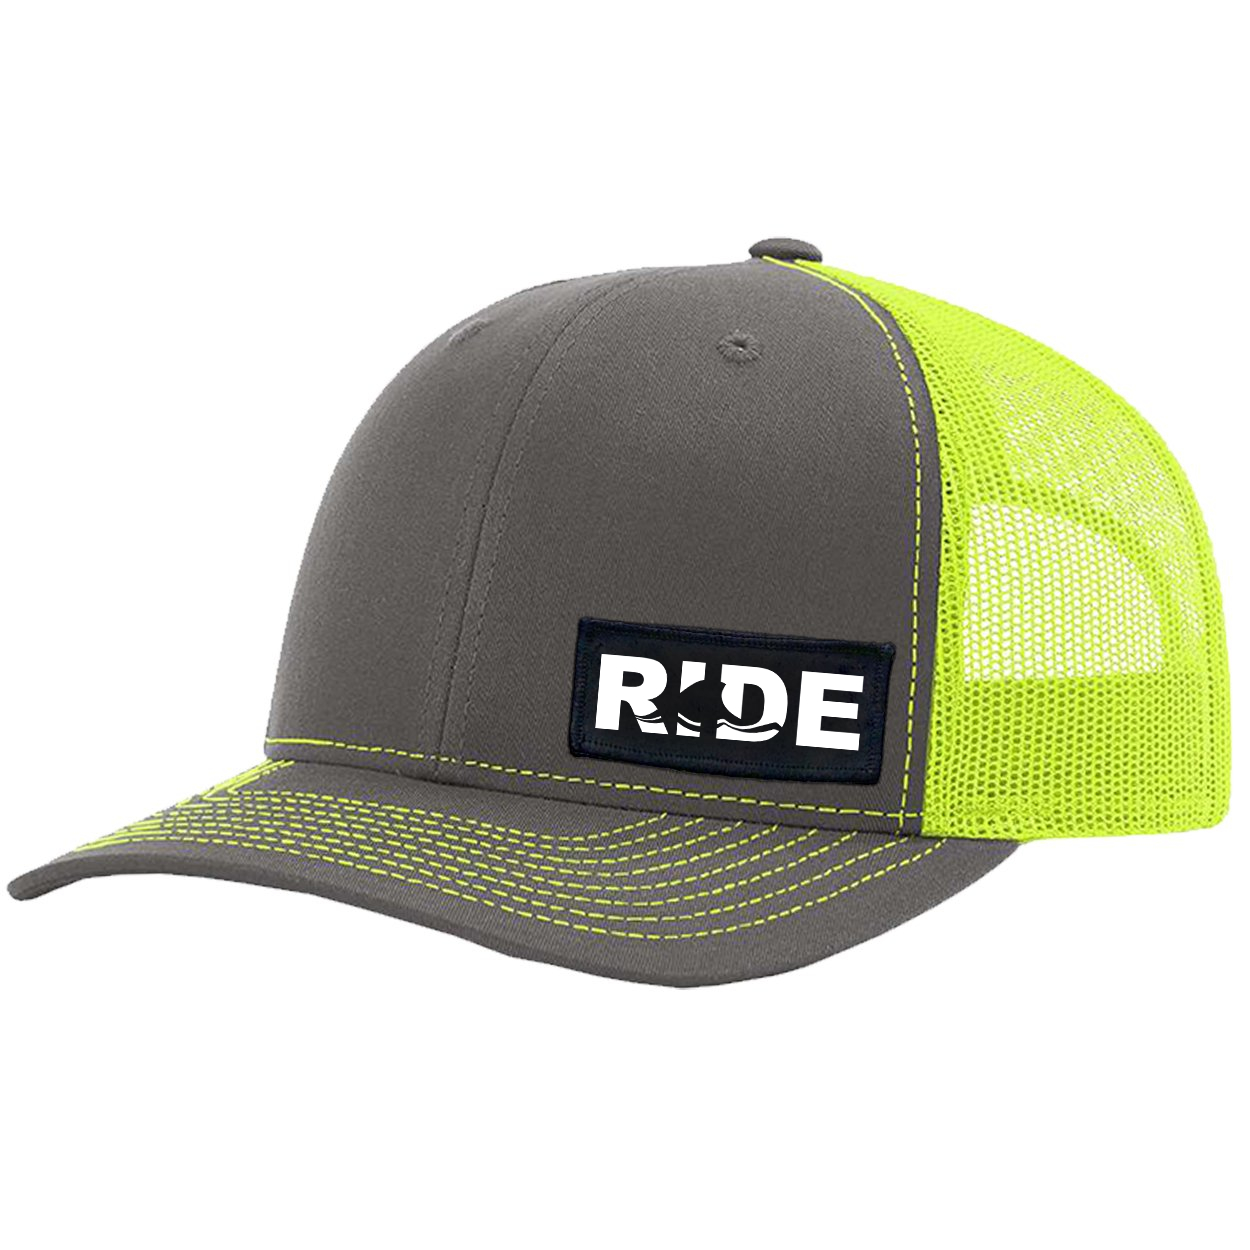 Ride Wave Logo Night Out Woven Patch Snapback Trucker Hat Charcoal/Neon Yellow (White Logo)